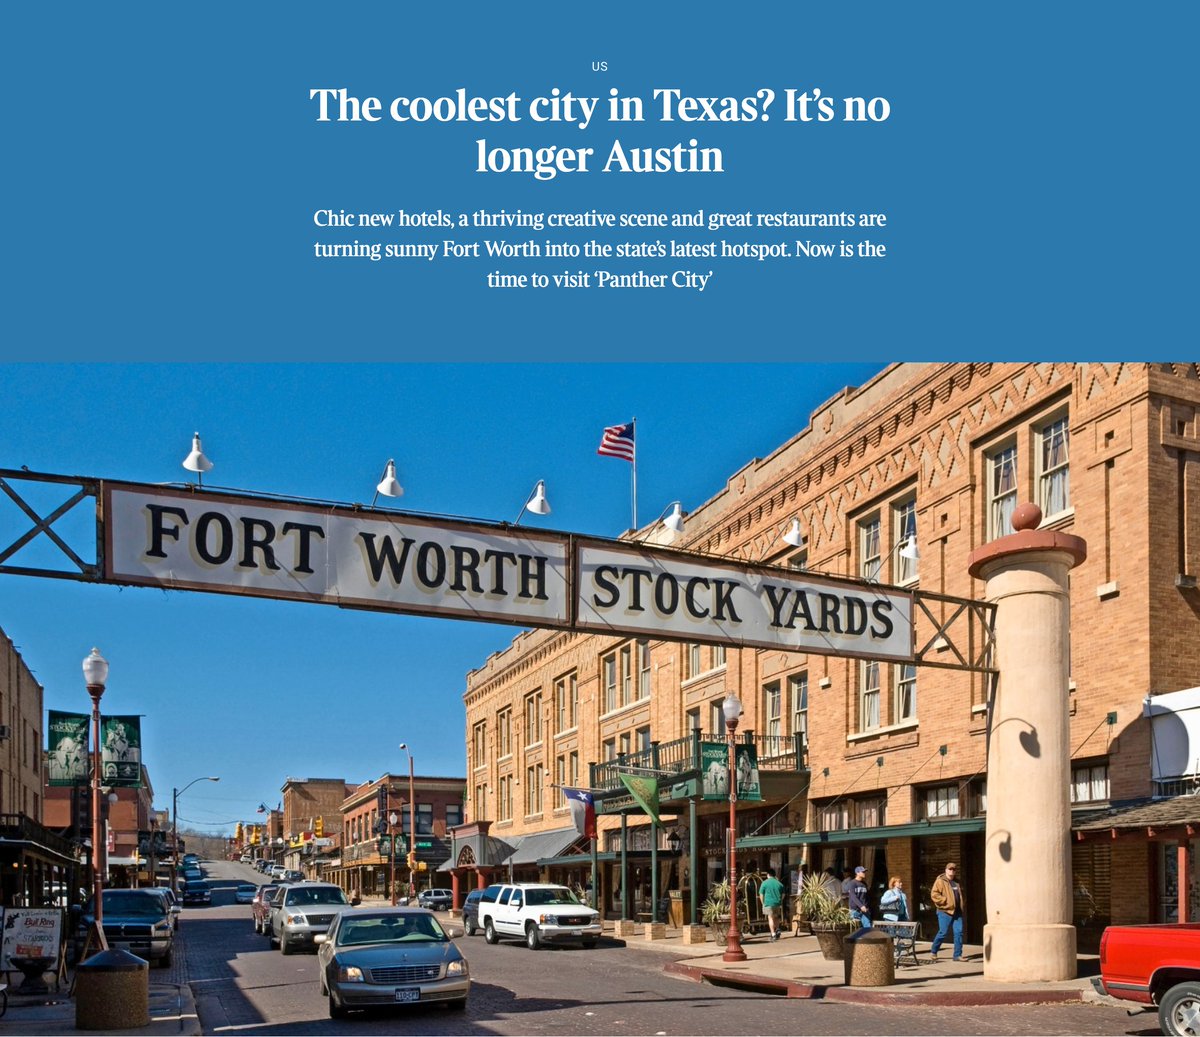 'I always tell people that if they’re visiting Texas and they want to see Los Angeles, they should go to Dallas. But if they’re visiting Texas and they want to see Texas, they should come to #FortWorth.' – @ChefTimLove Via @TheTimes: itbeginsinfw.com/3vxU2zh #Tourism